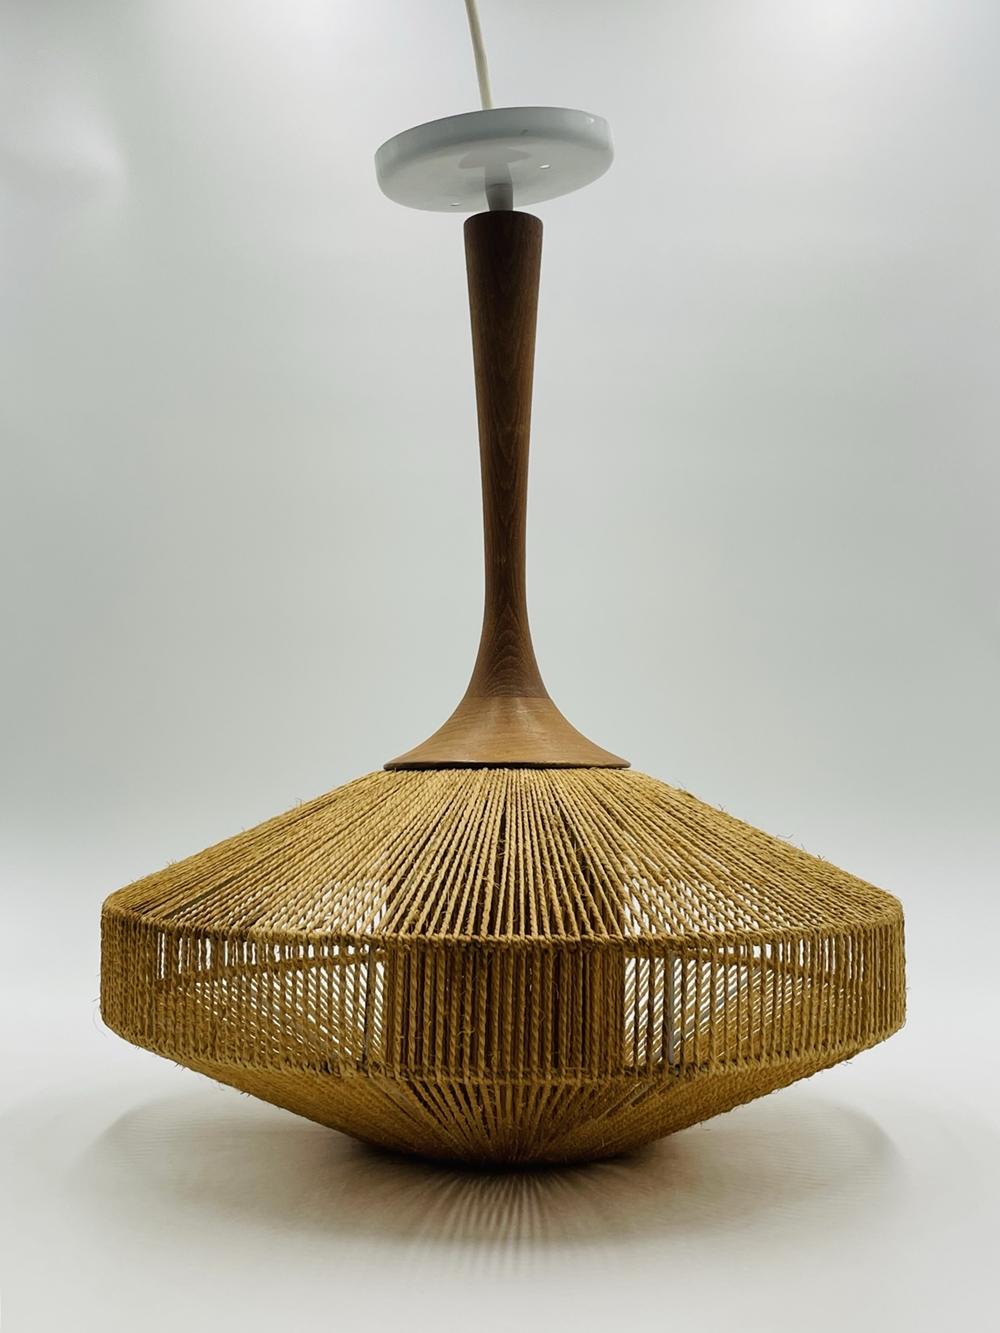 Fog & Morup Hanging Light with Teak Stem and Jute-Wrapped Shade 1